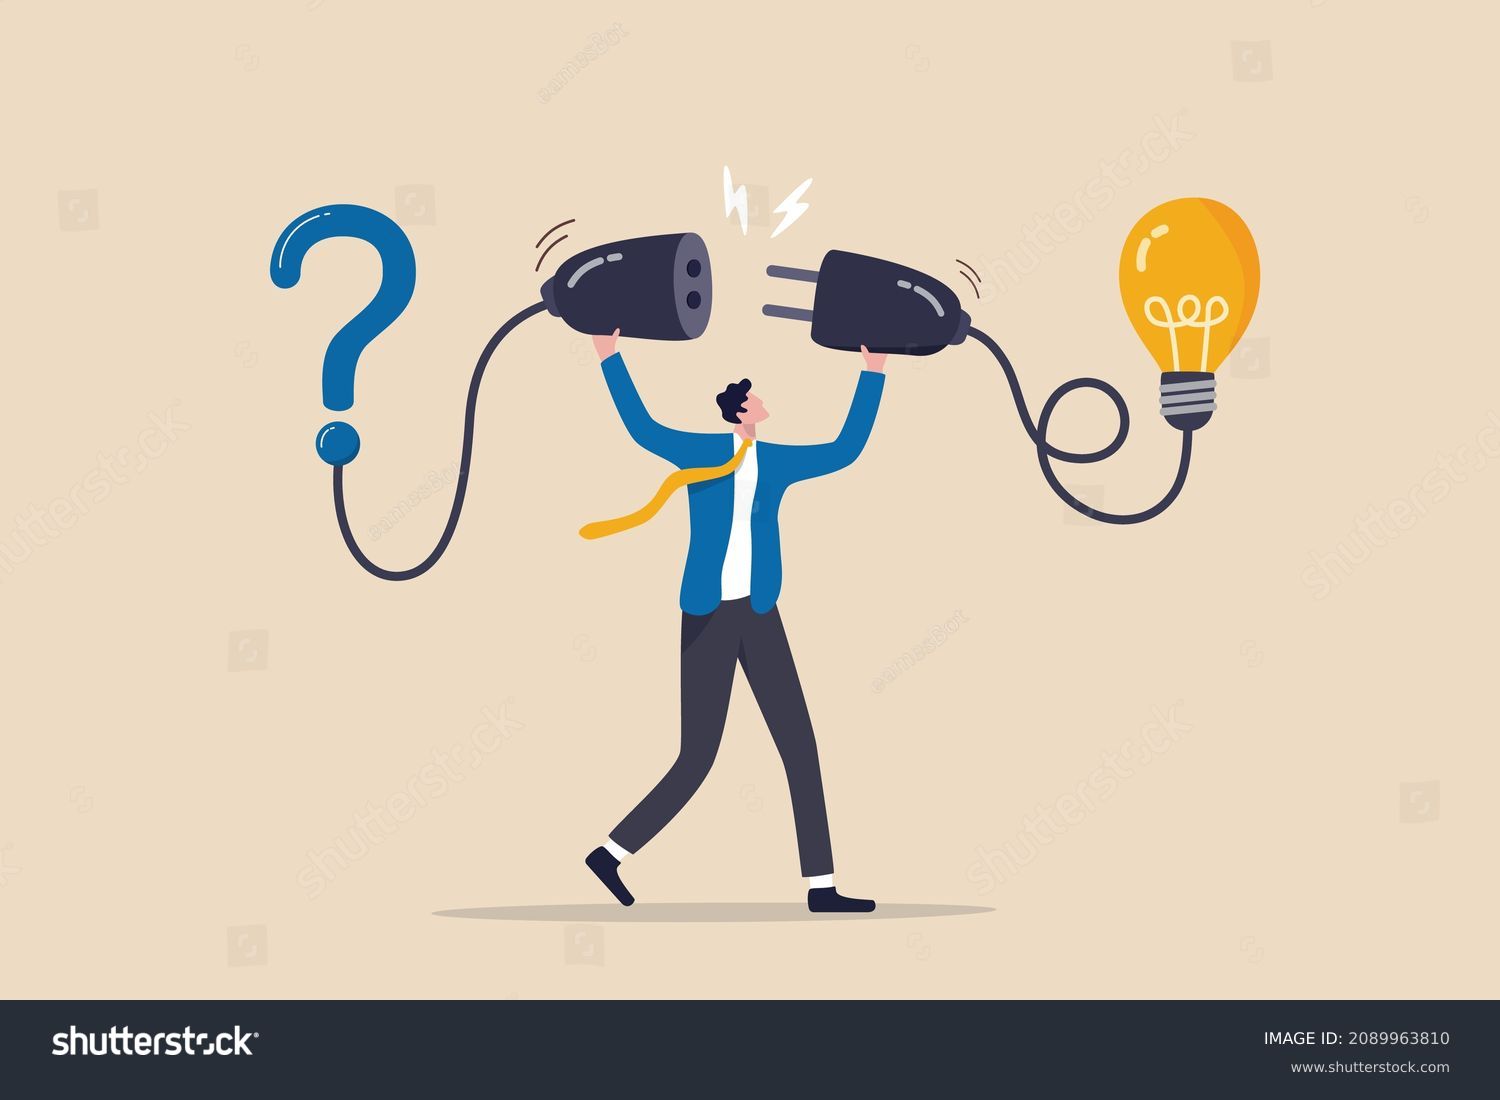 Solution solving problem, answer to hard question or creativity idea and innovation help business success, leadership to overcome difficulty, businessman connect question mark with lightbulb solution. #2089963810